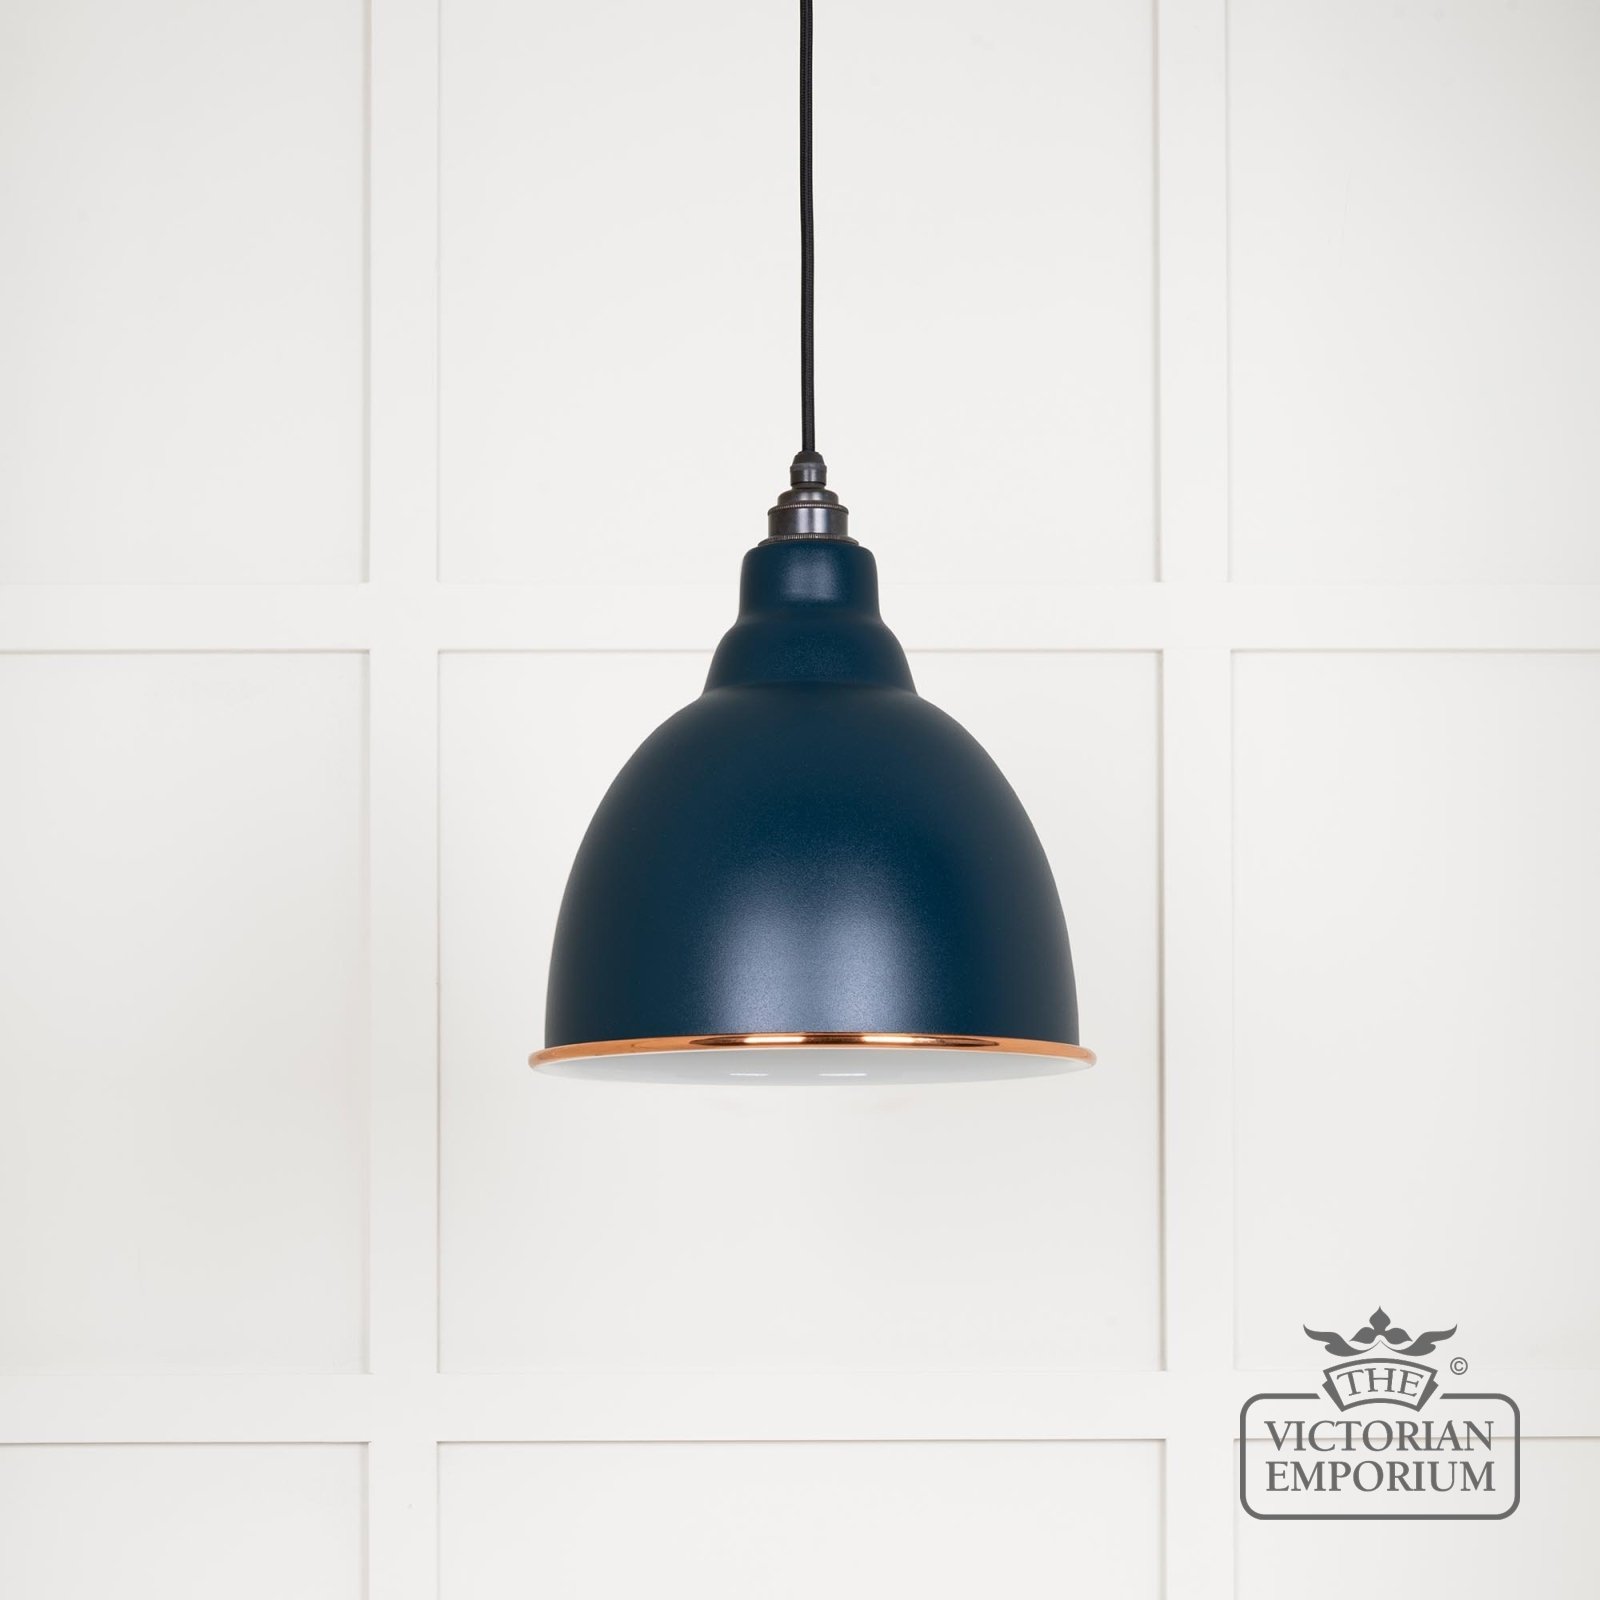 Brindle pendant light in Dusk with white gloss interior